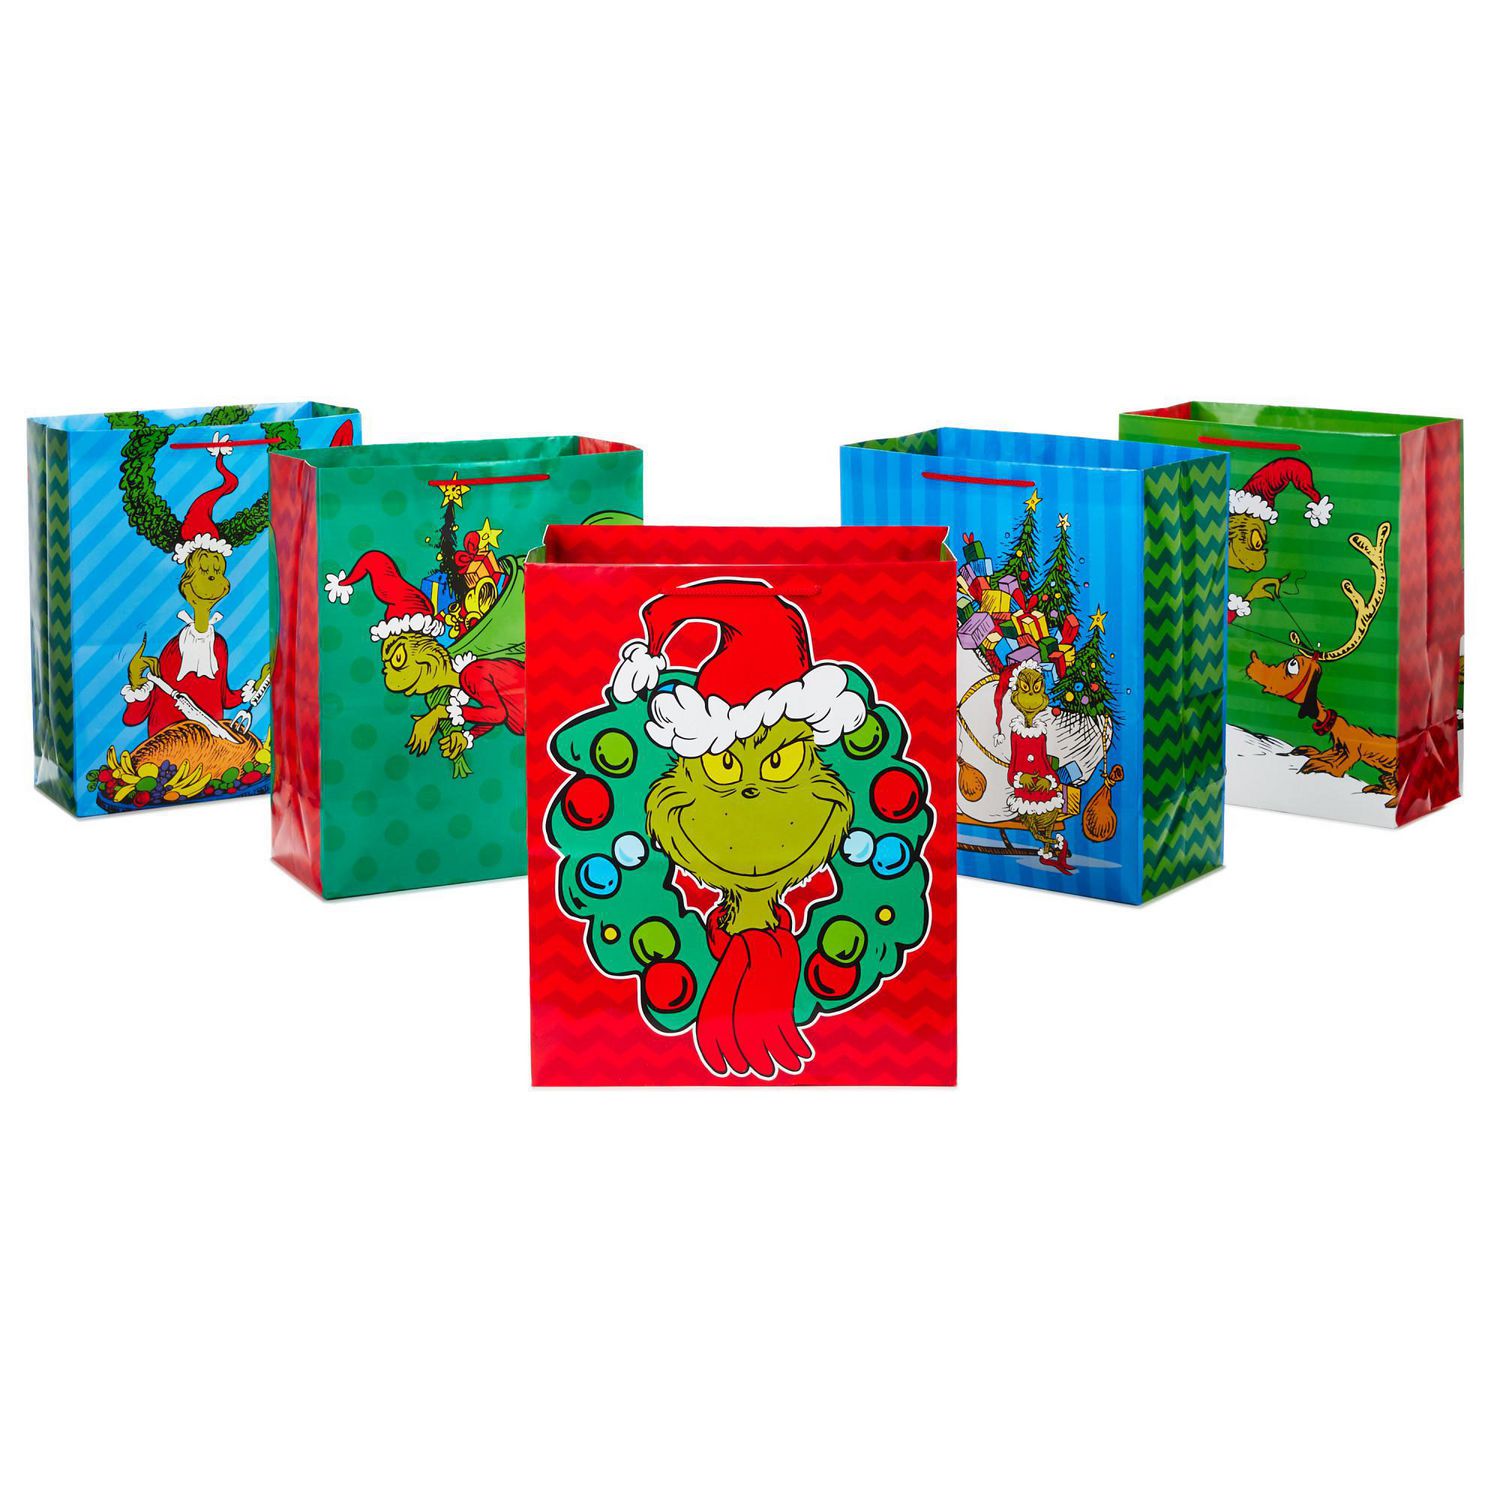 The grinch gift bag